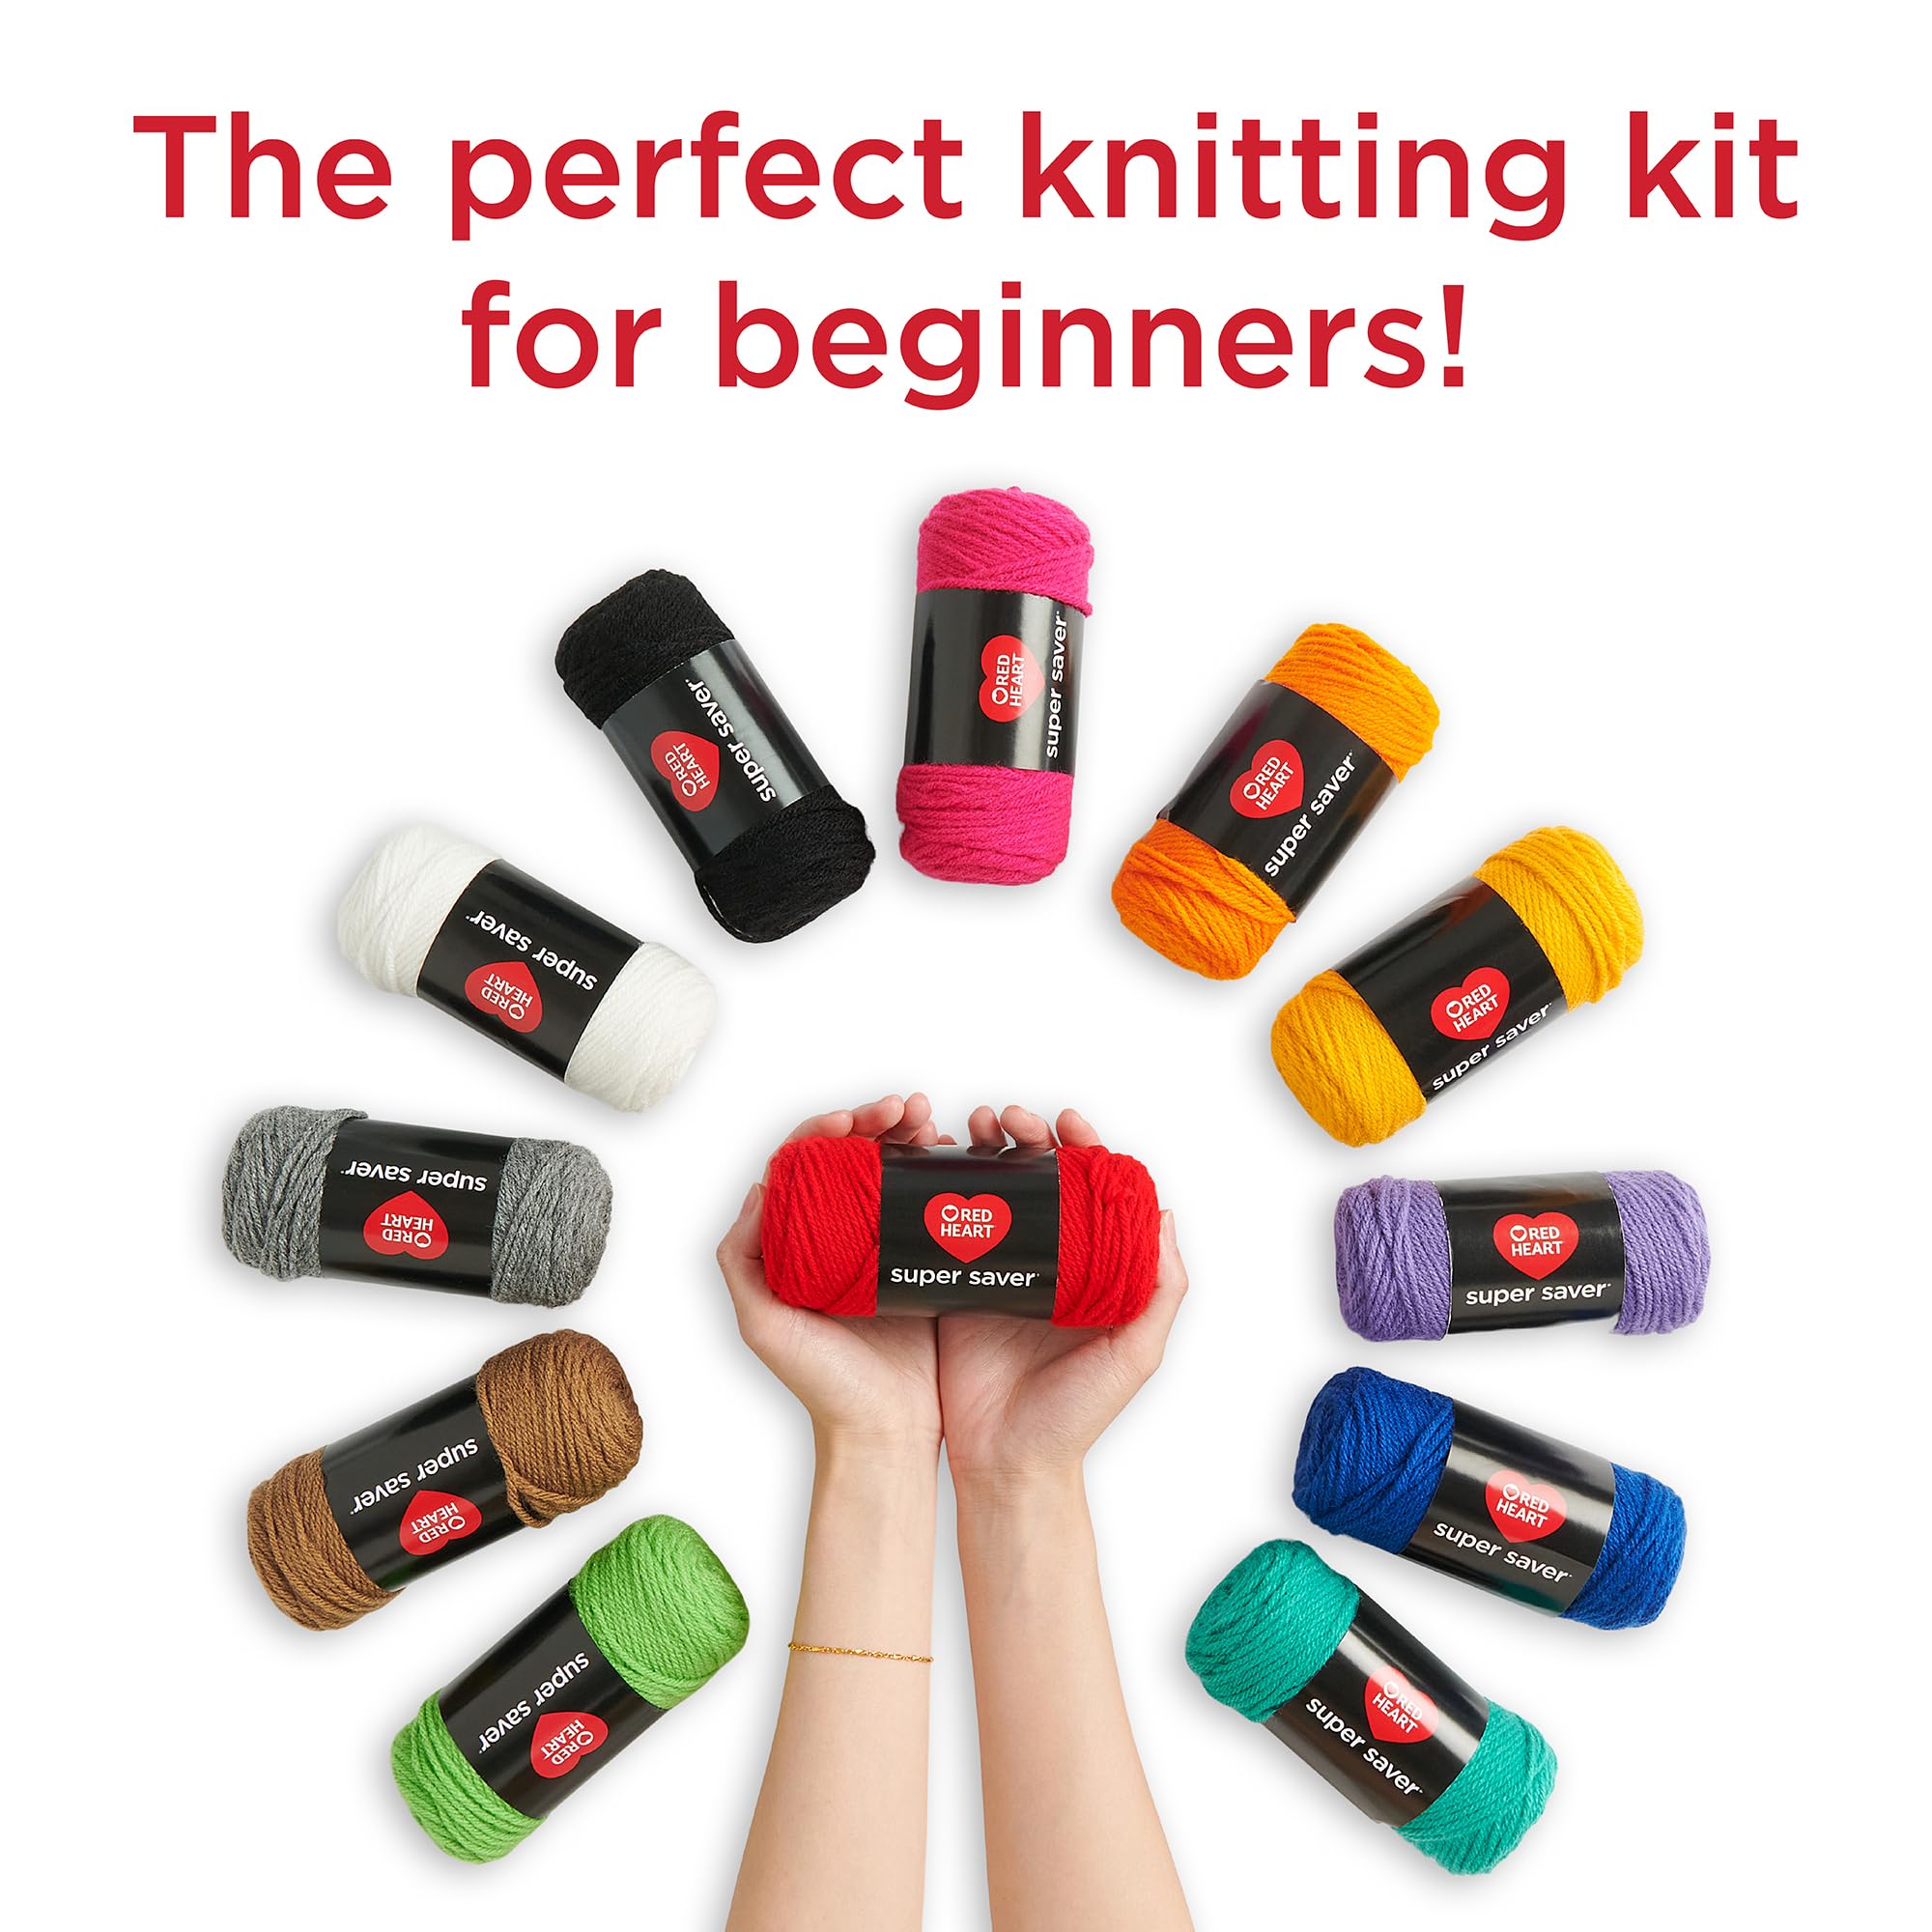 Red Heart Super Saver Soft Acrylic Yarn Beginners Knit Kit, with 12 Pack of 50g/1.7 oz. 4 Medium Worsted Yarn and Acceessories Knitting & Crocheting, for Chunky Sweaters, Blankets, Amigurumi